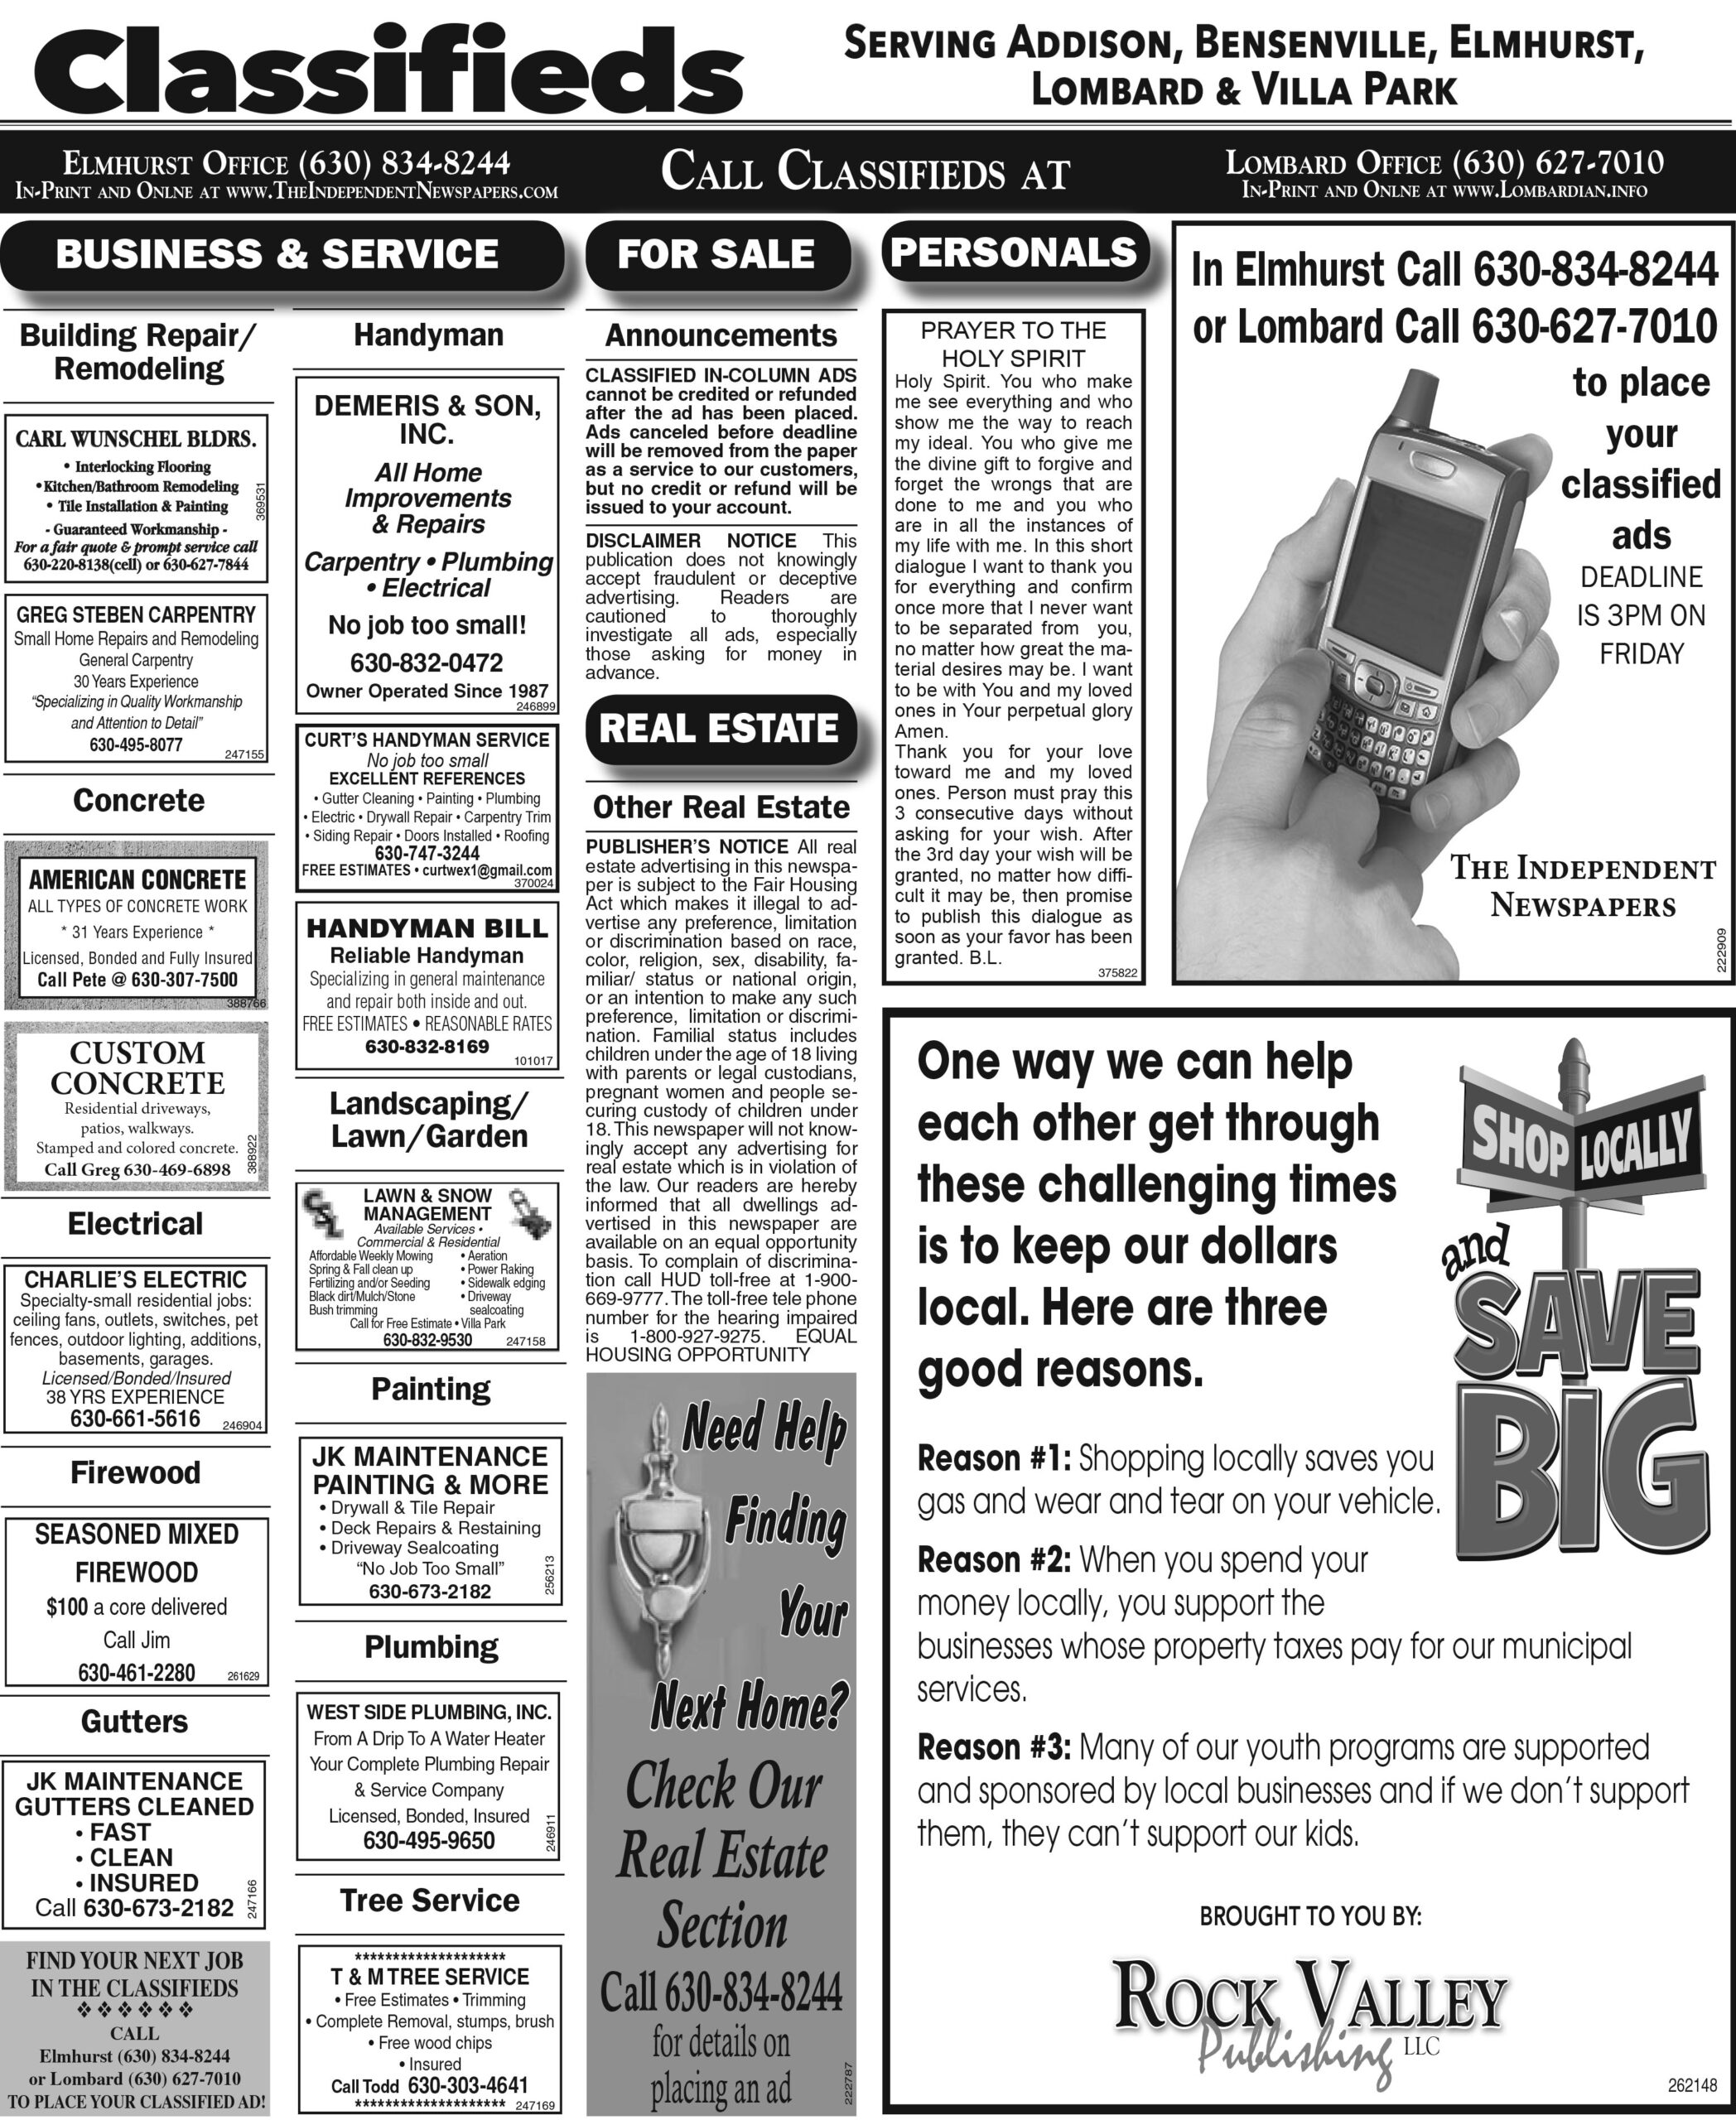 The Independent Newspapers Classifieds